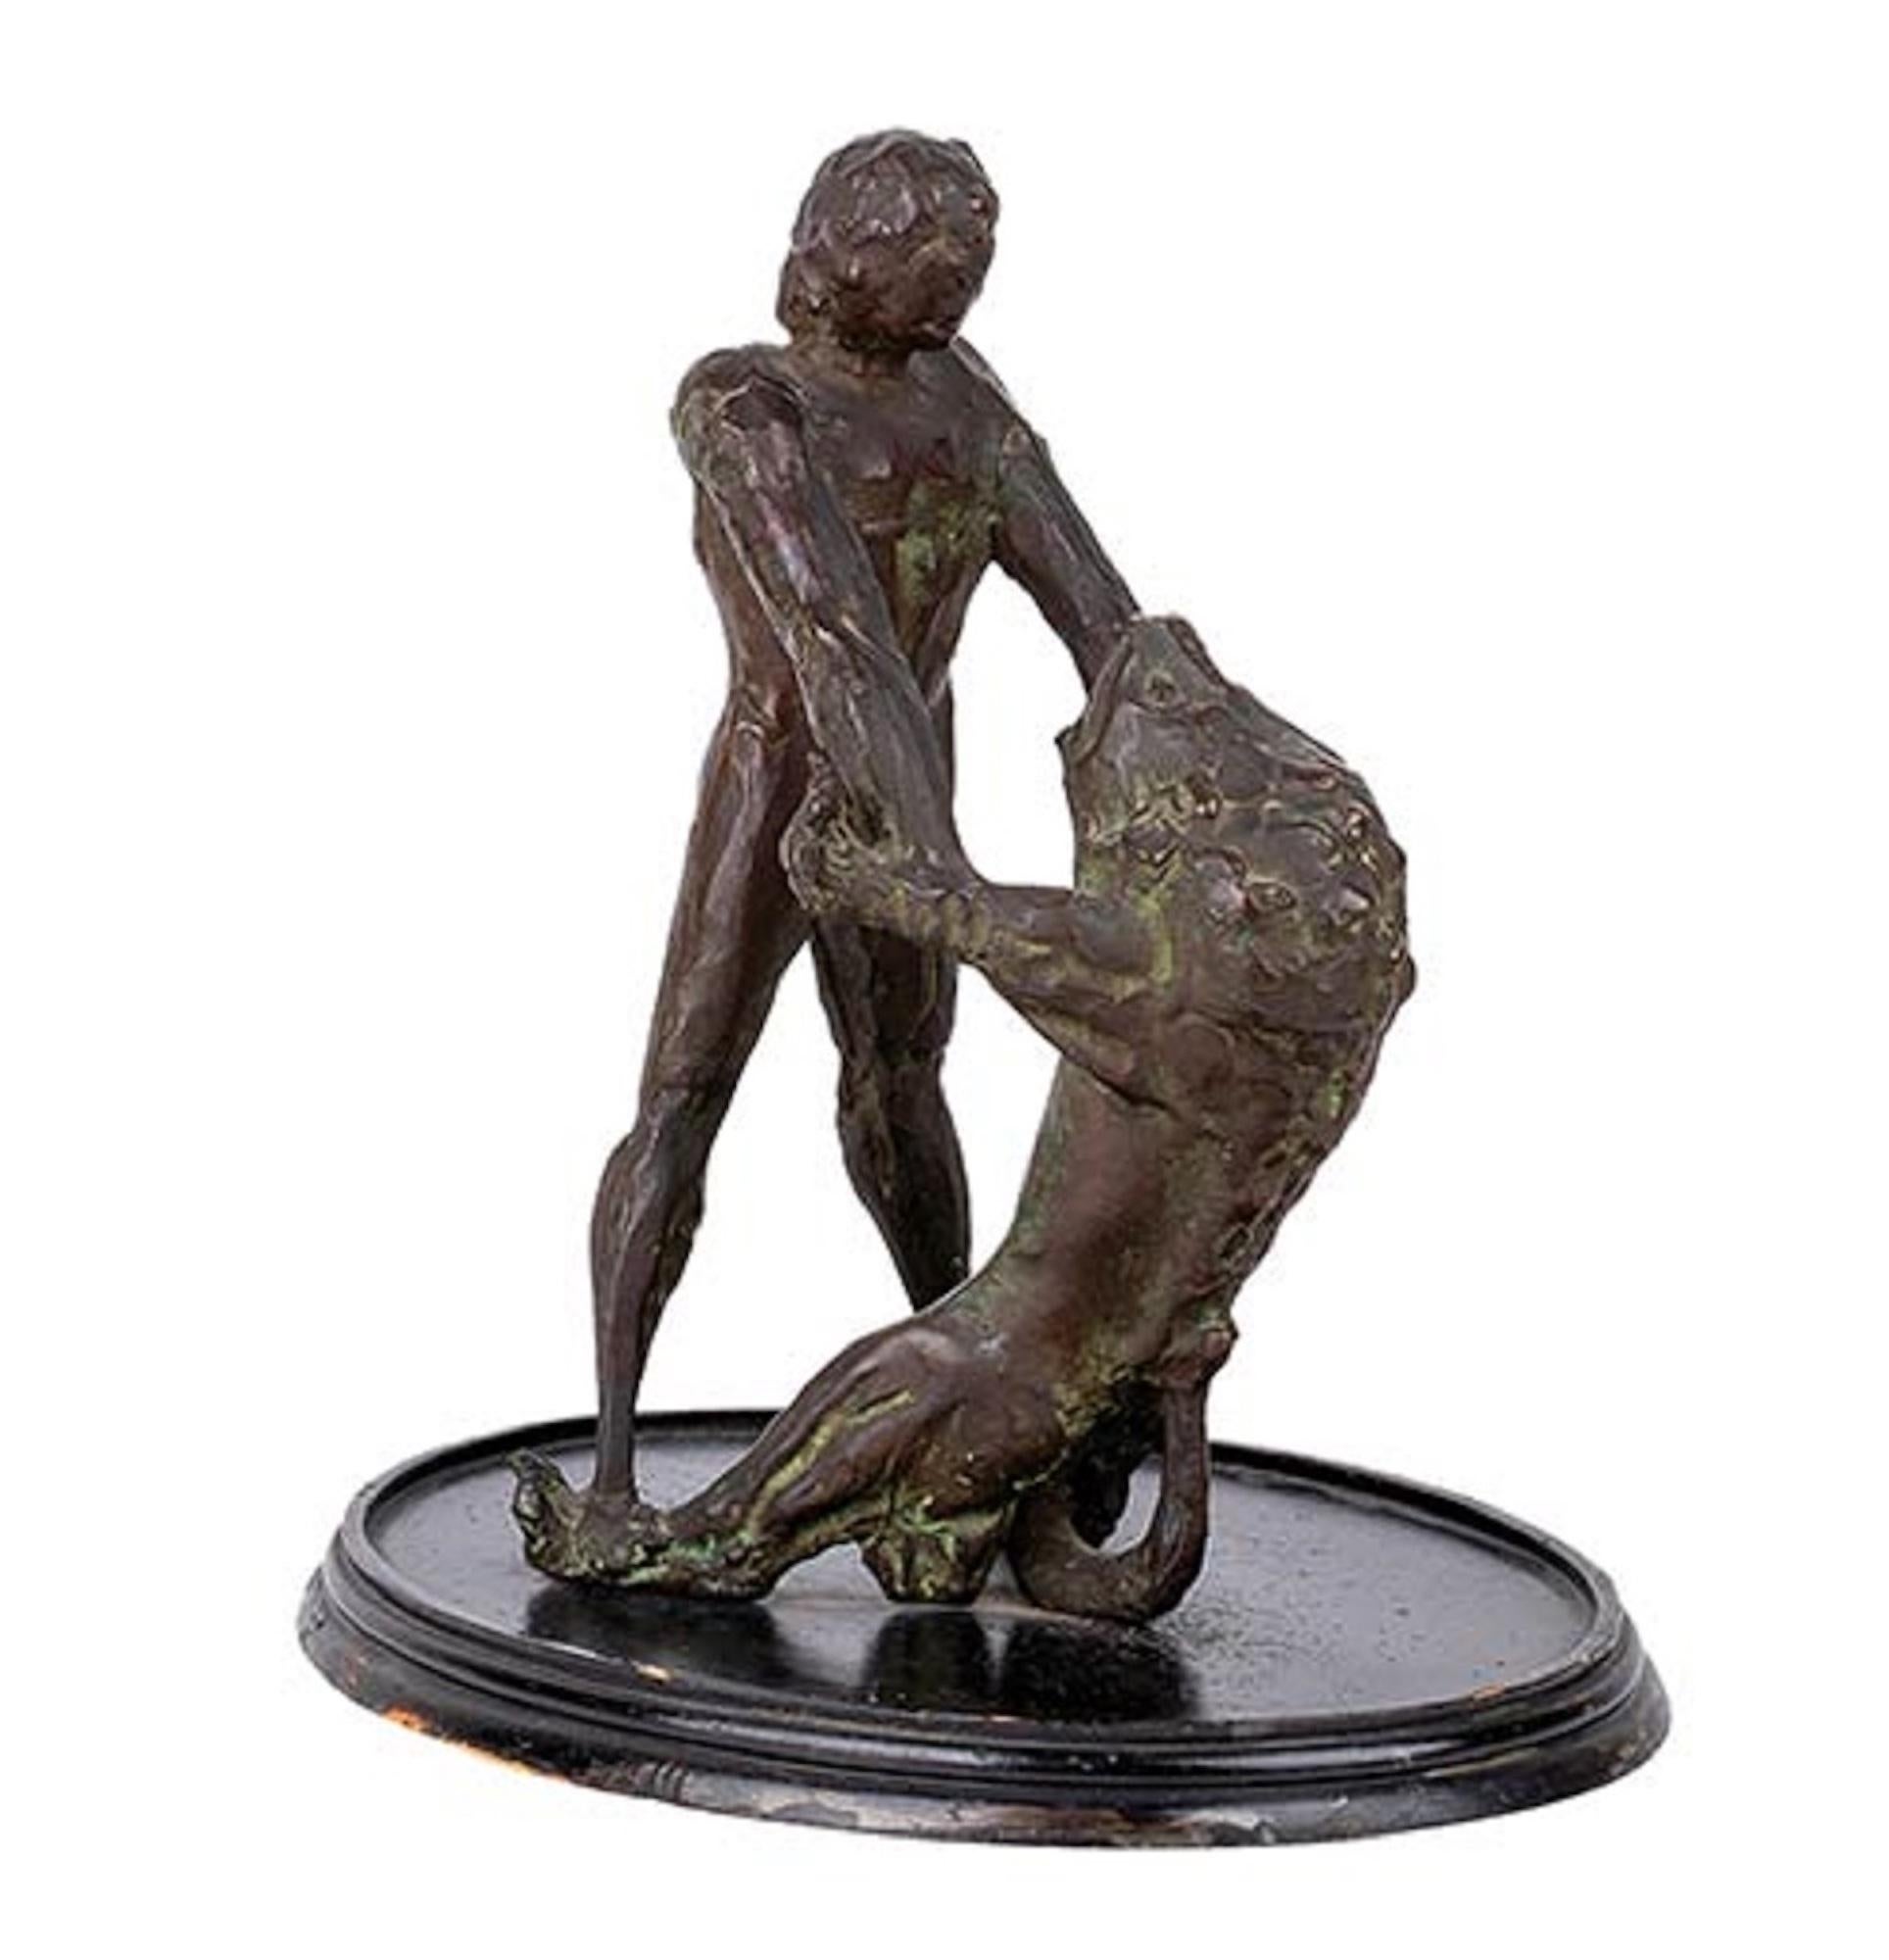 African Victory is an original work realized by Arturo Martini in 1936-1937.

Original bronze work with a wood base. 

The small work is one of the sketches realized for the idea of the monument for the Victory builded in Ethiopia and represents the